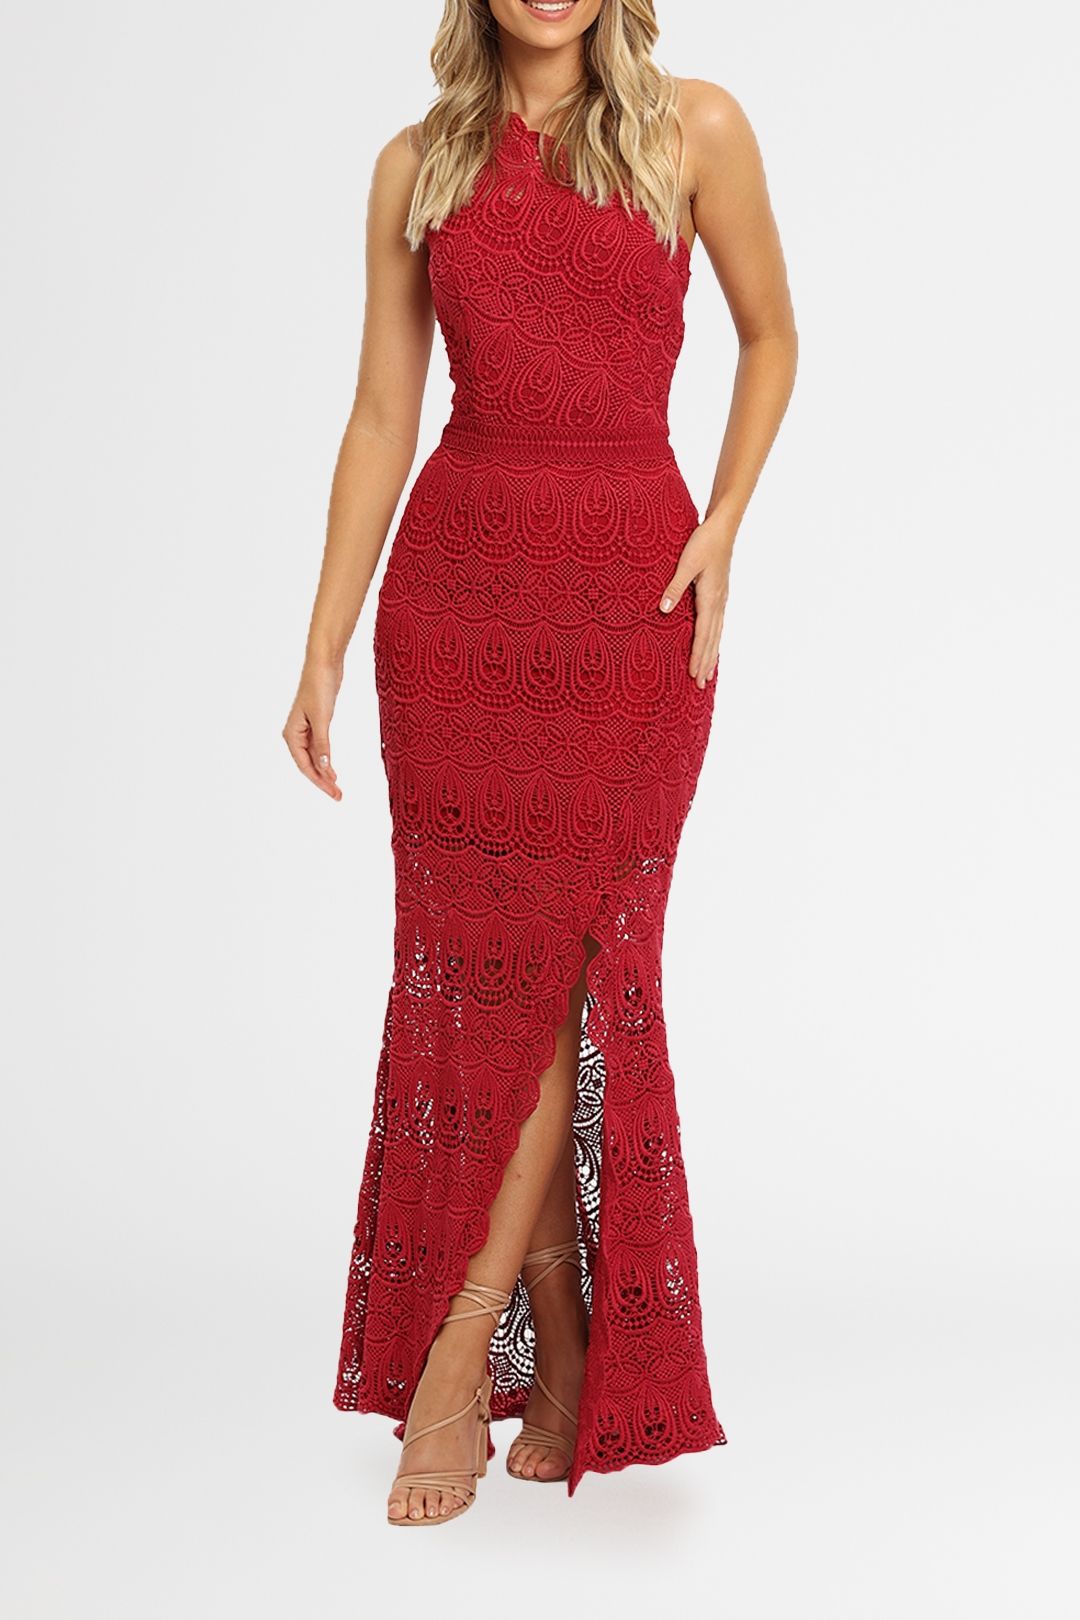 Grace and Hart Winter Rose Red gown